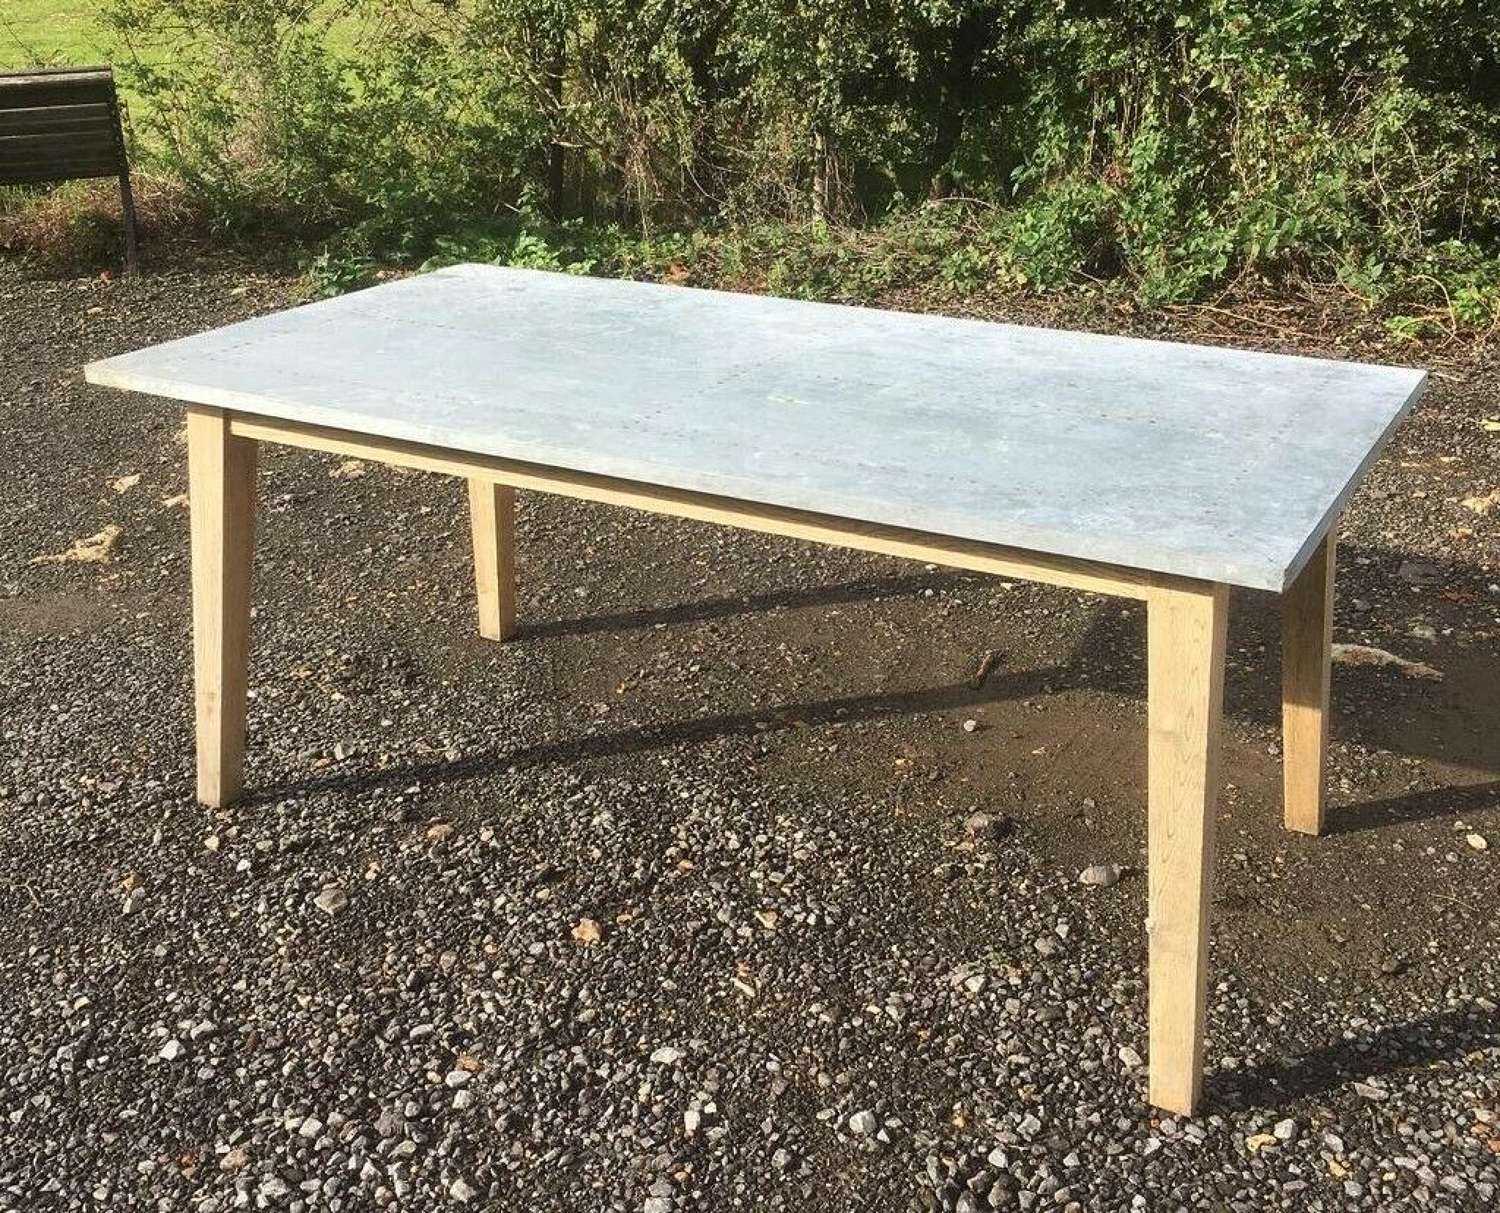 M1317 RECLAIMED INDUSTRIAL STYLE LOAF ZINC TOPPED 6 SEATER TABLE